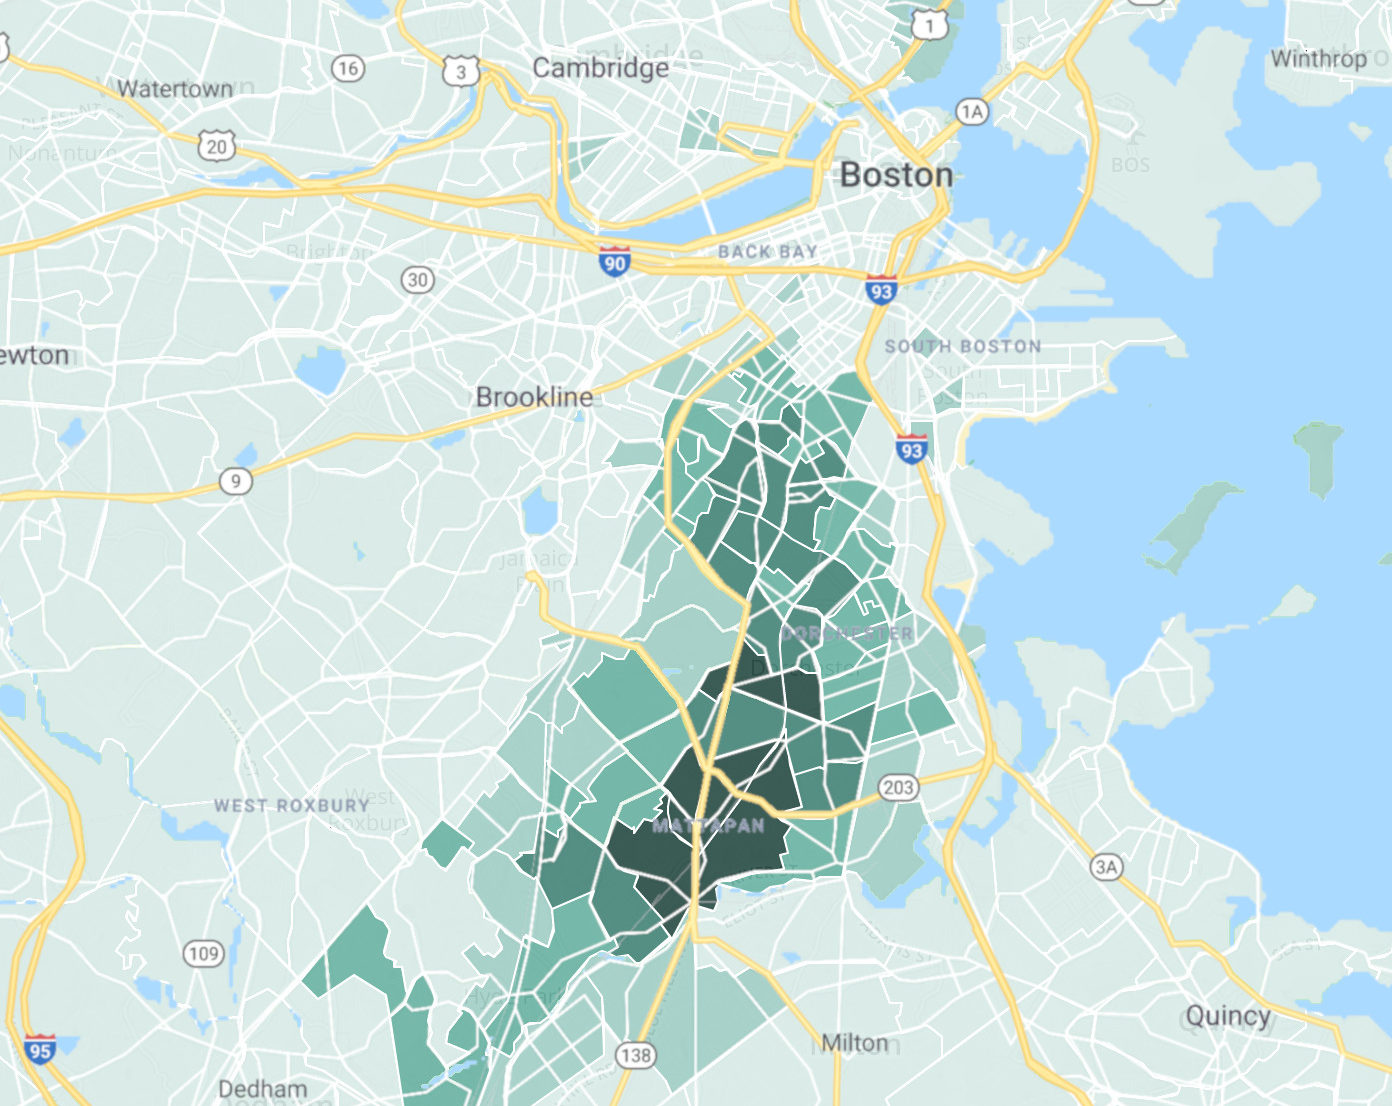 A map of the U.S. Census Bureau's estimated population density of black residents in the Boston area, courtesy of CensusReporter.org.